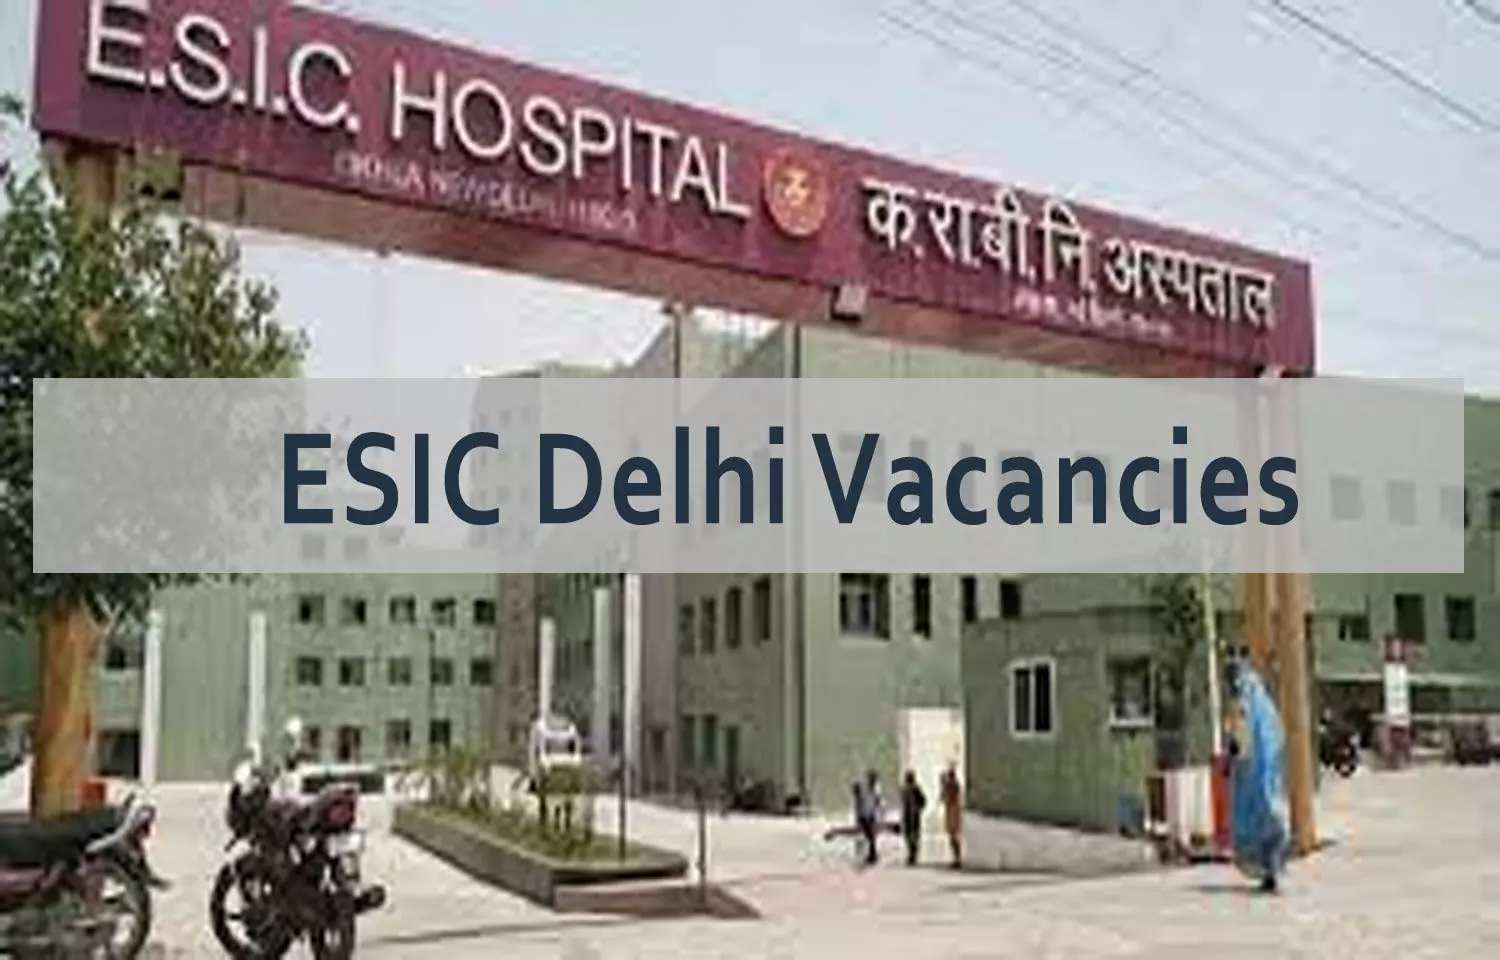 Walk In Interview At ESIC Medical College Basaidarapur Delhi for Faculty Post Vacancies, details